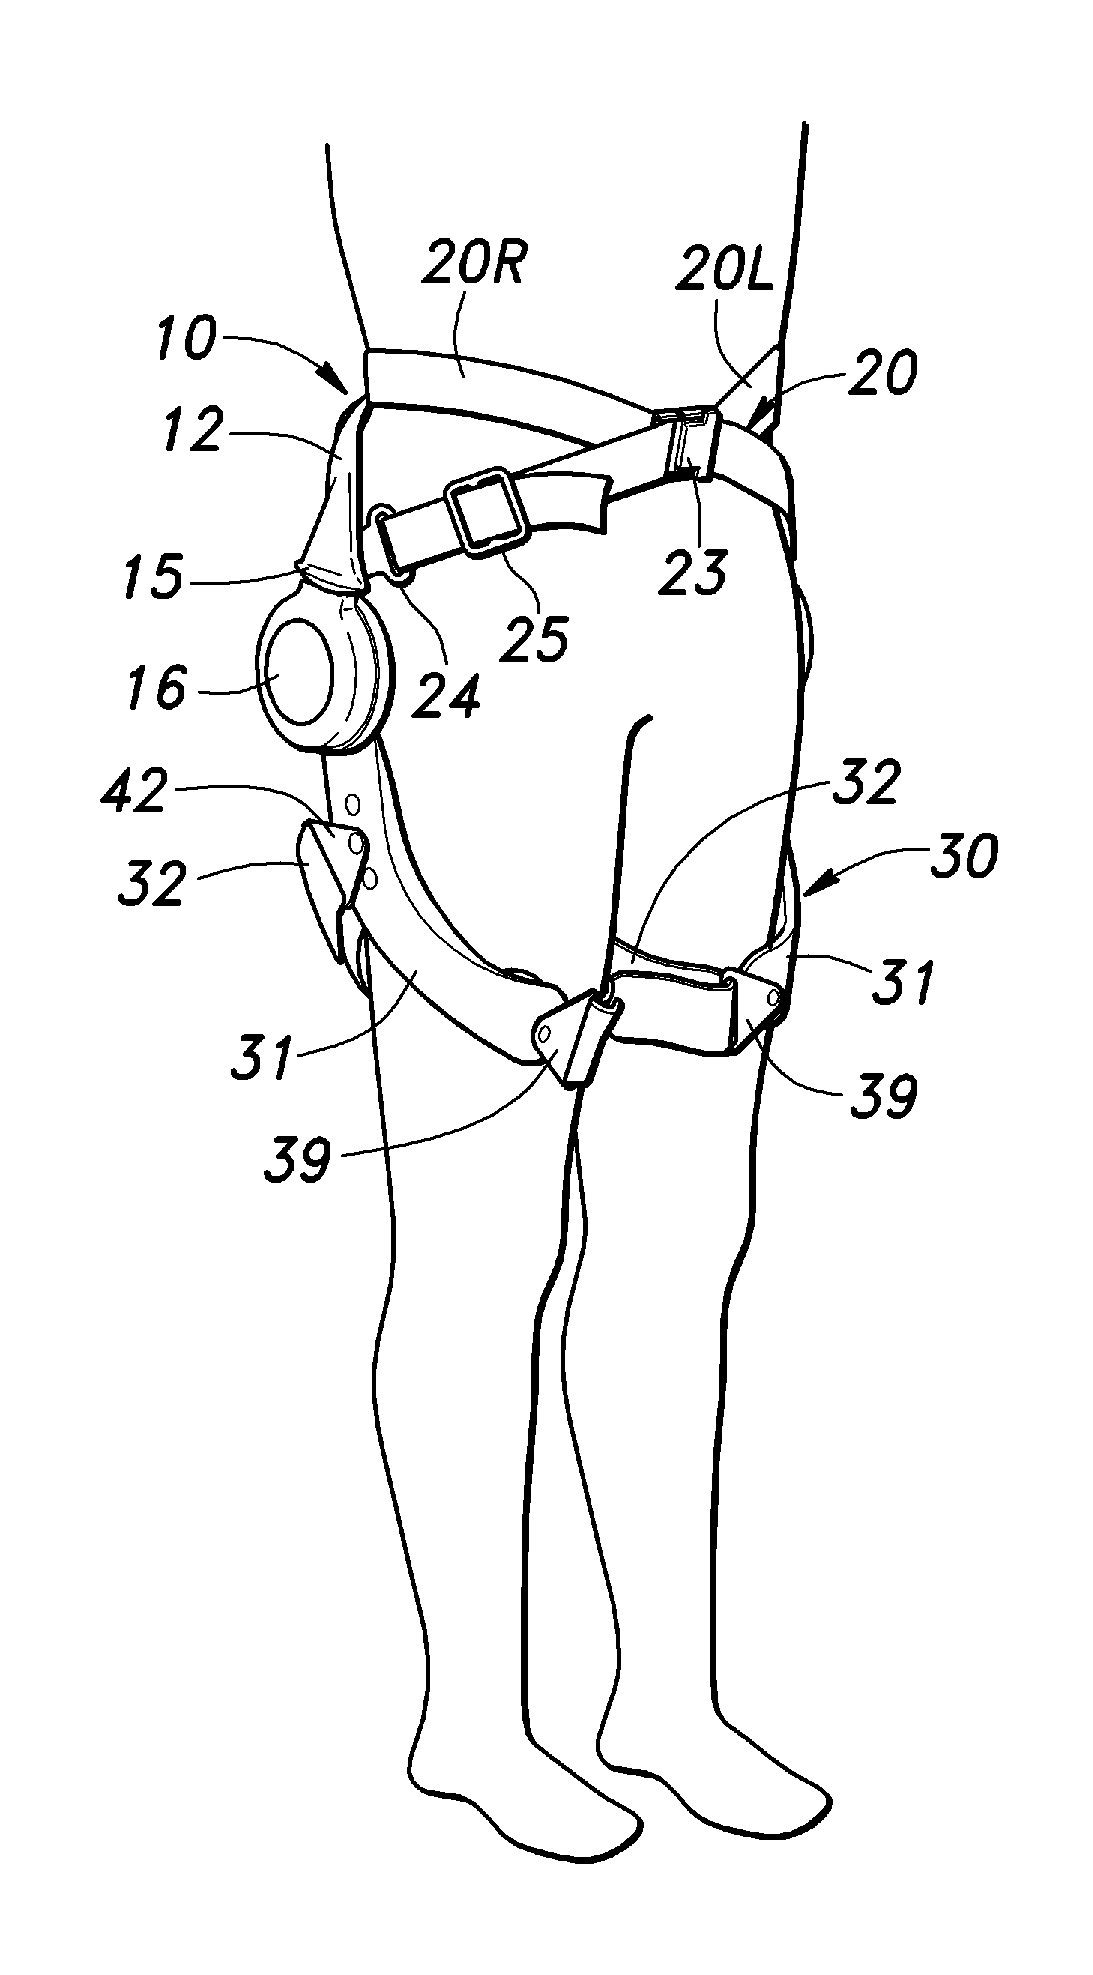 Femoral support member for a walking assistance device